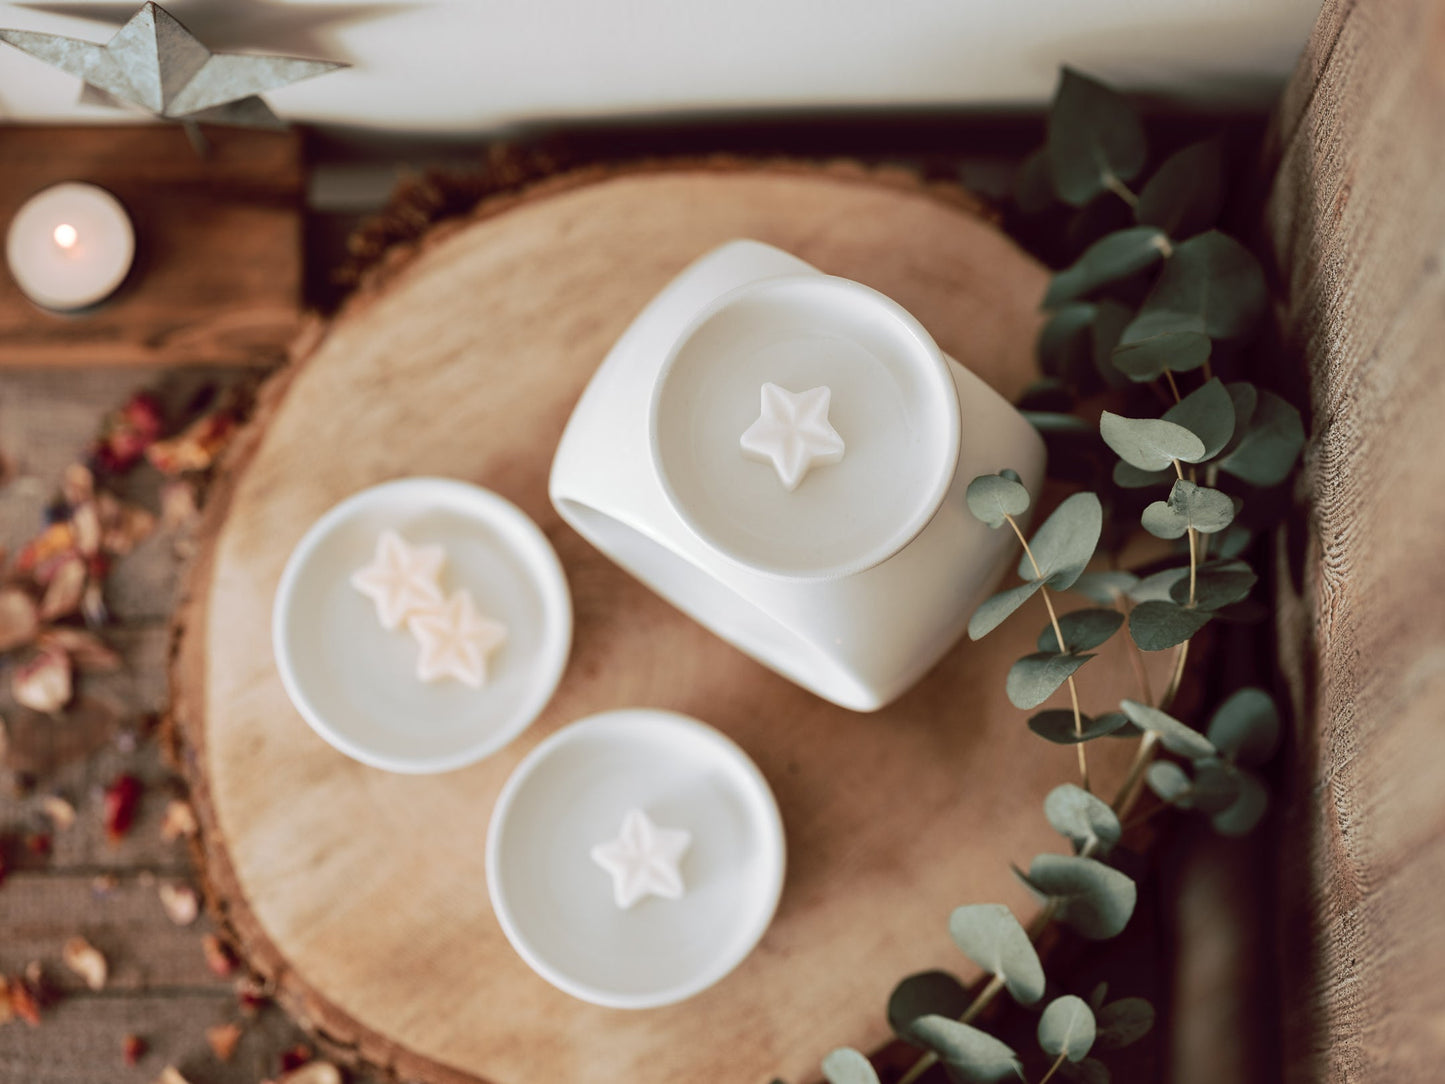 The Pear Orchard Soy Wax Melts